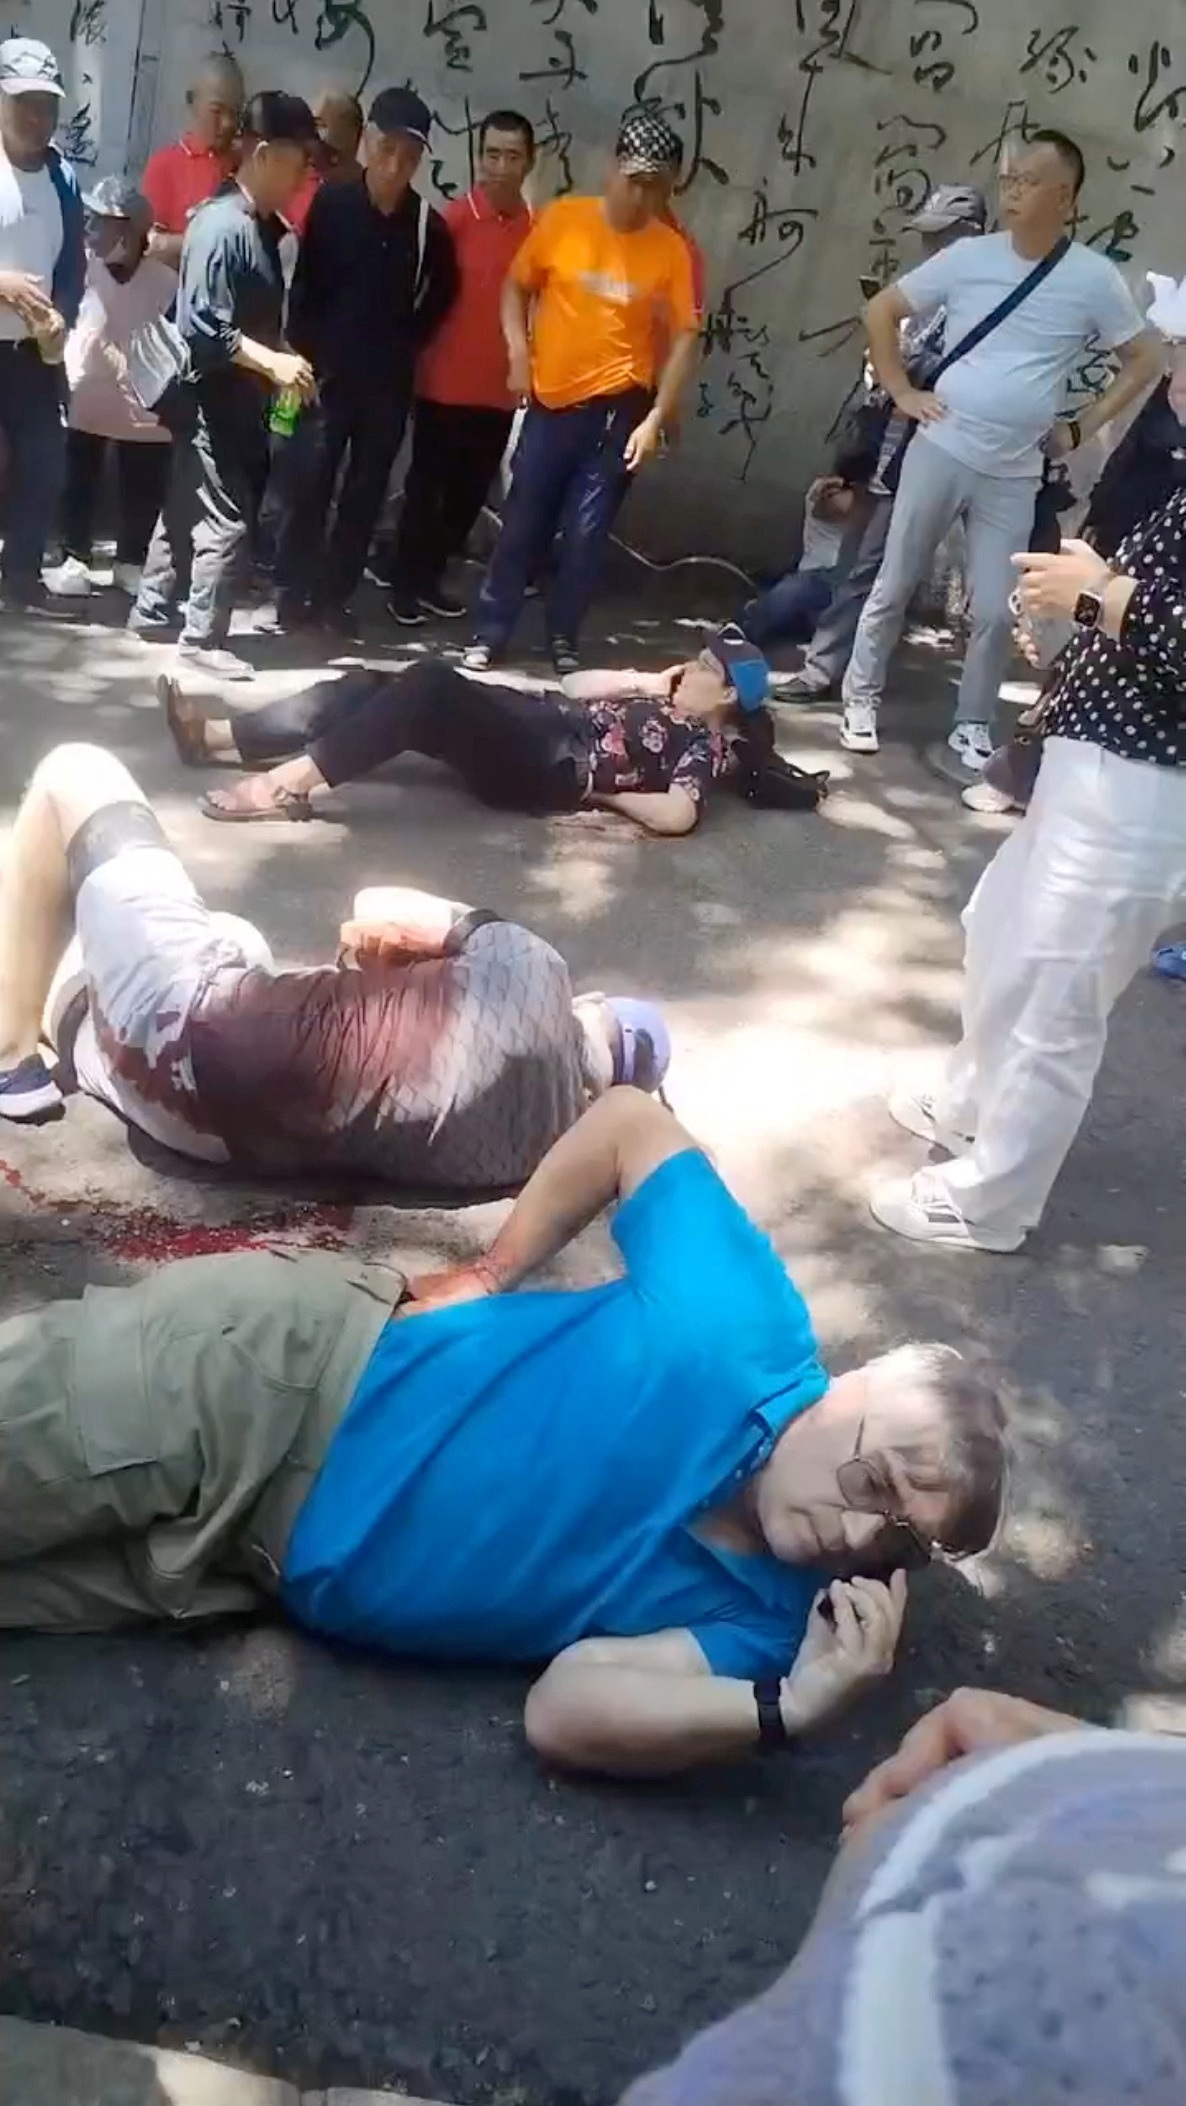 American educators reportedly stabbed in a public park in Jilin City